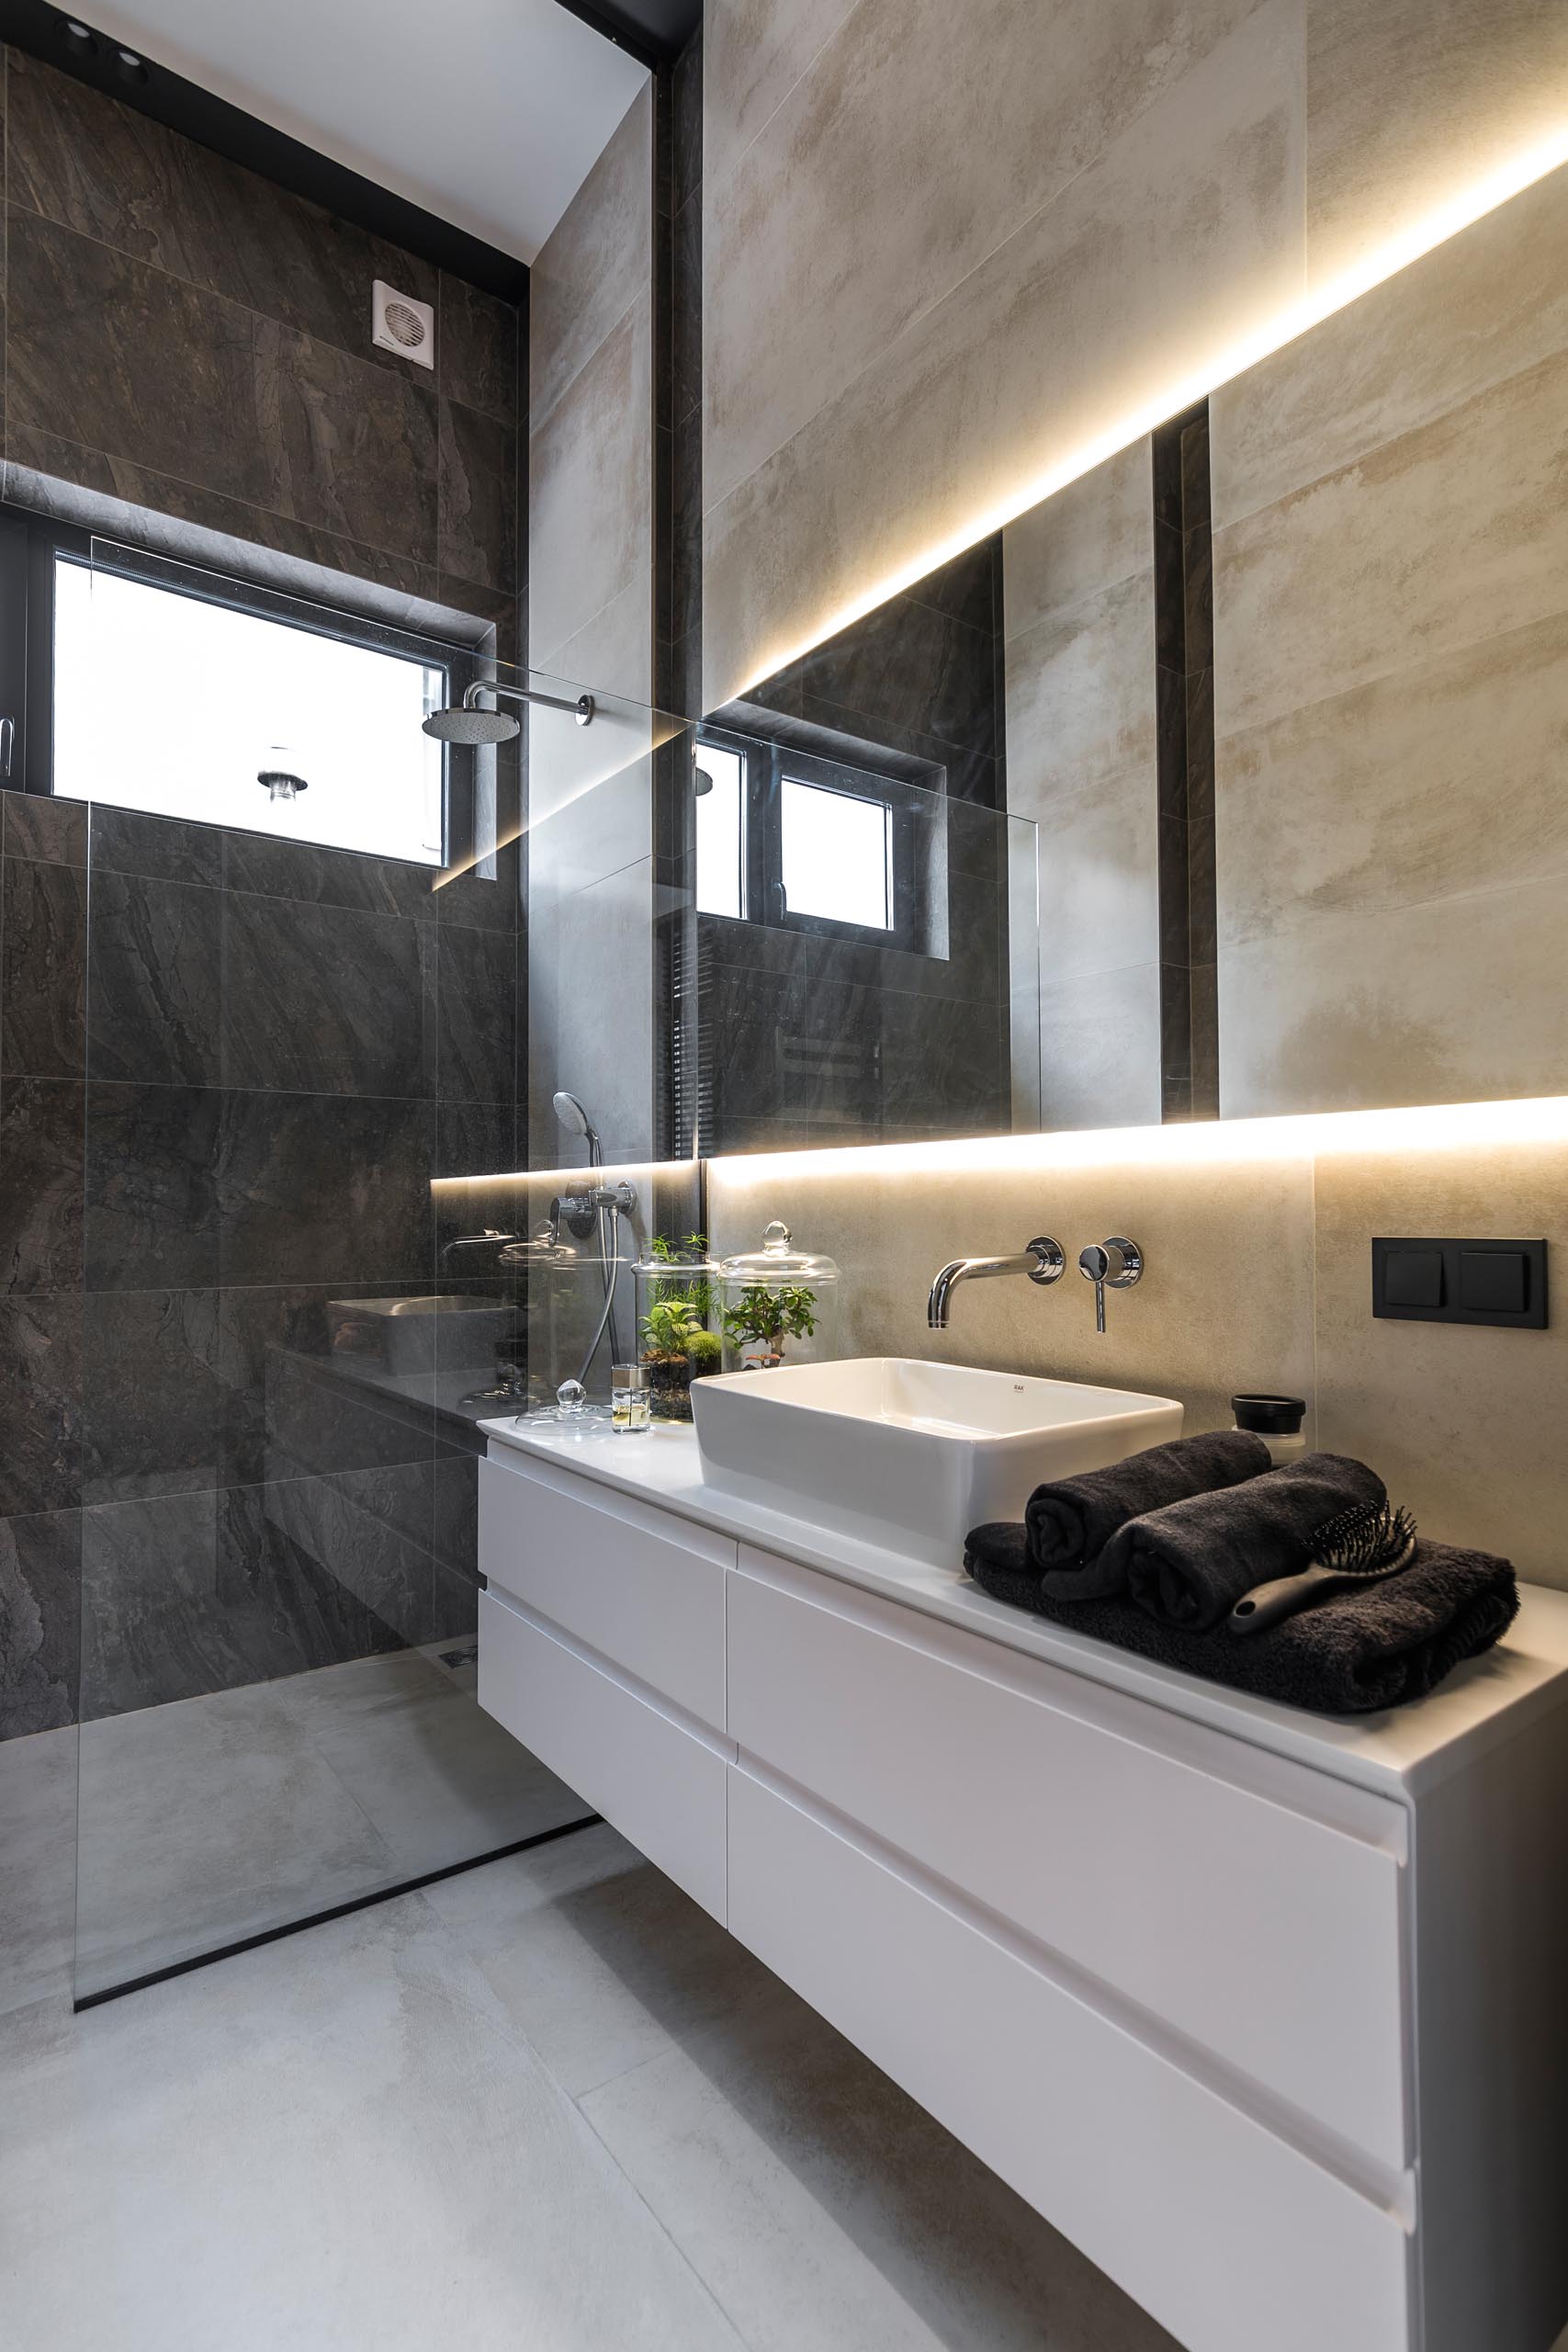 A modern bathroom with a white vanity and a backlit mirror.